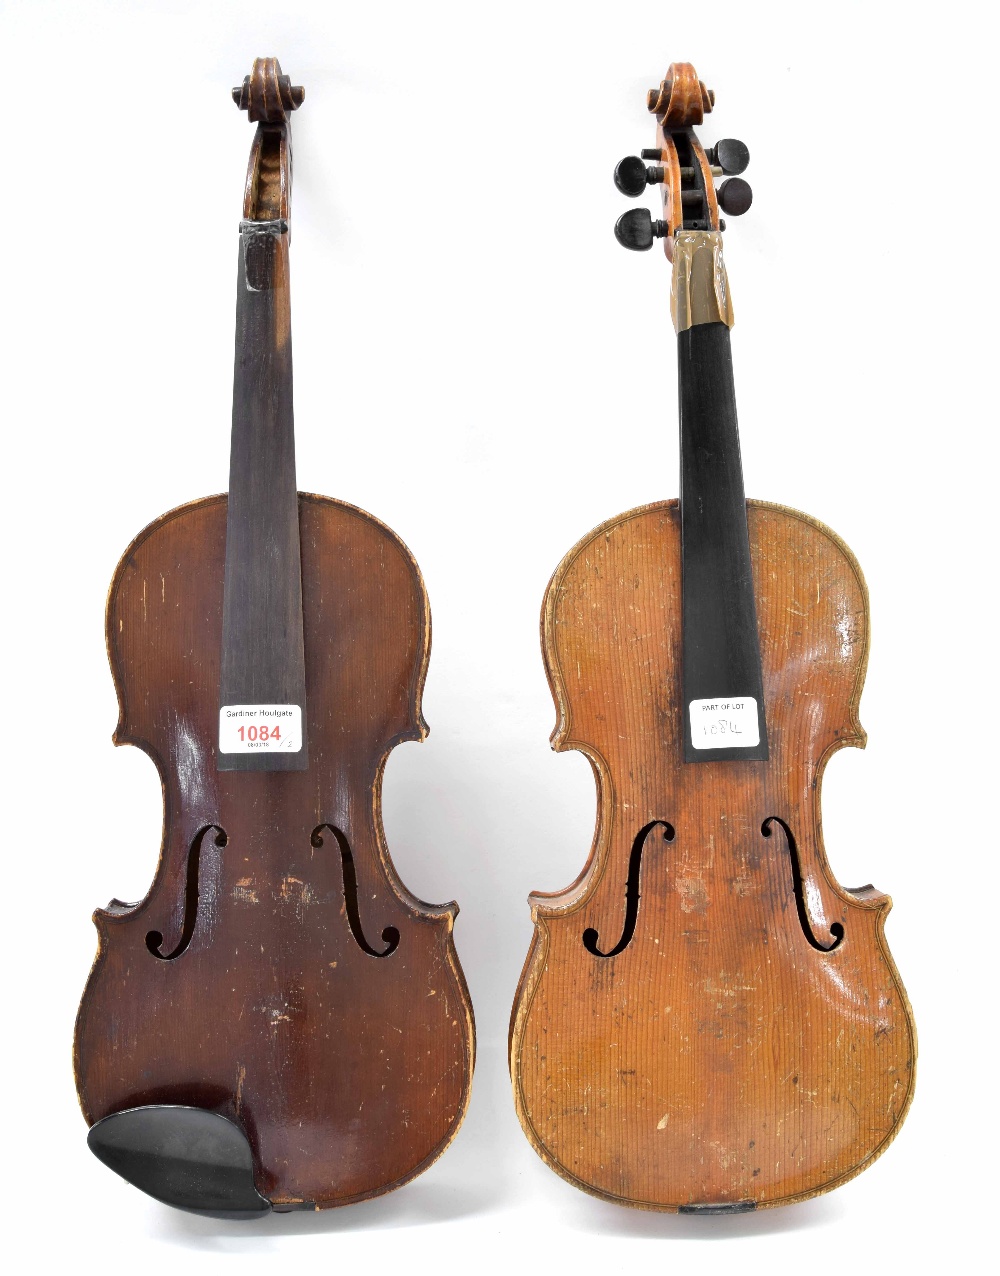 Three-quarter size violin, 13 3/8", 34cm; also another three-quarter size violin, 13 1/4", 33.